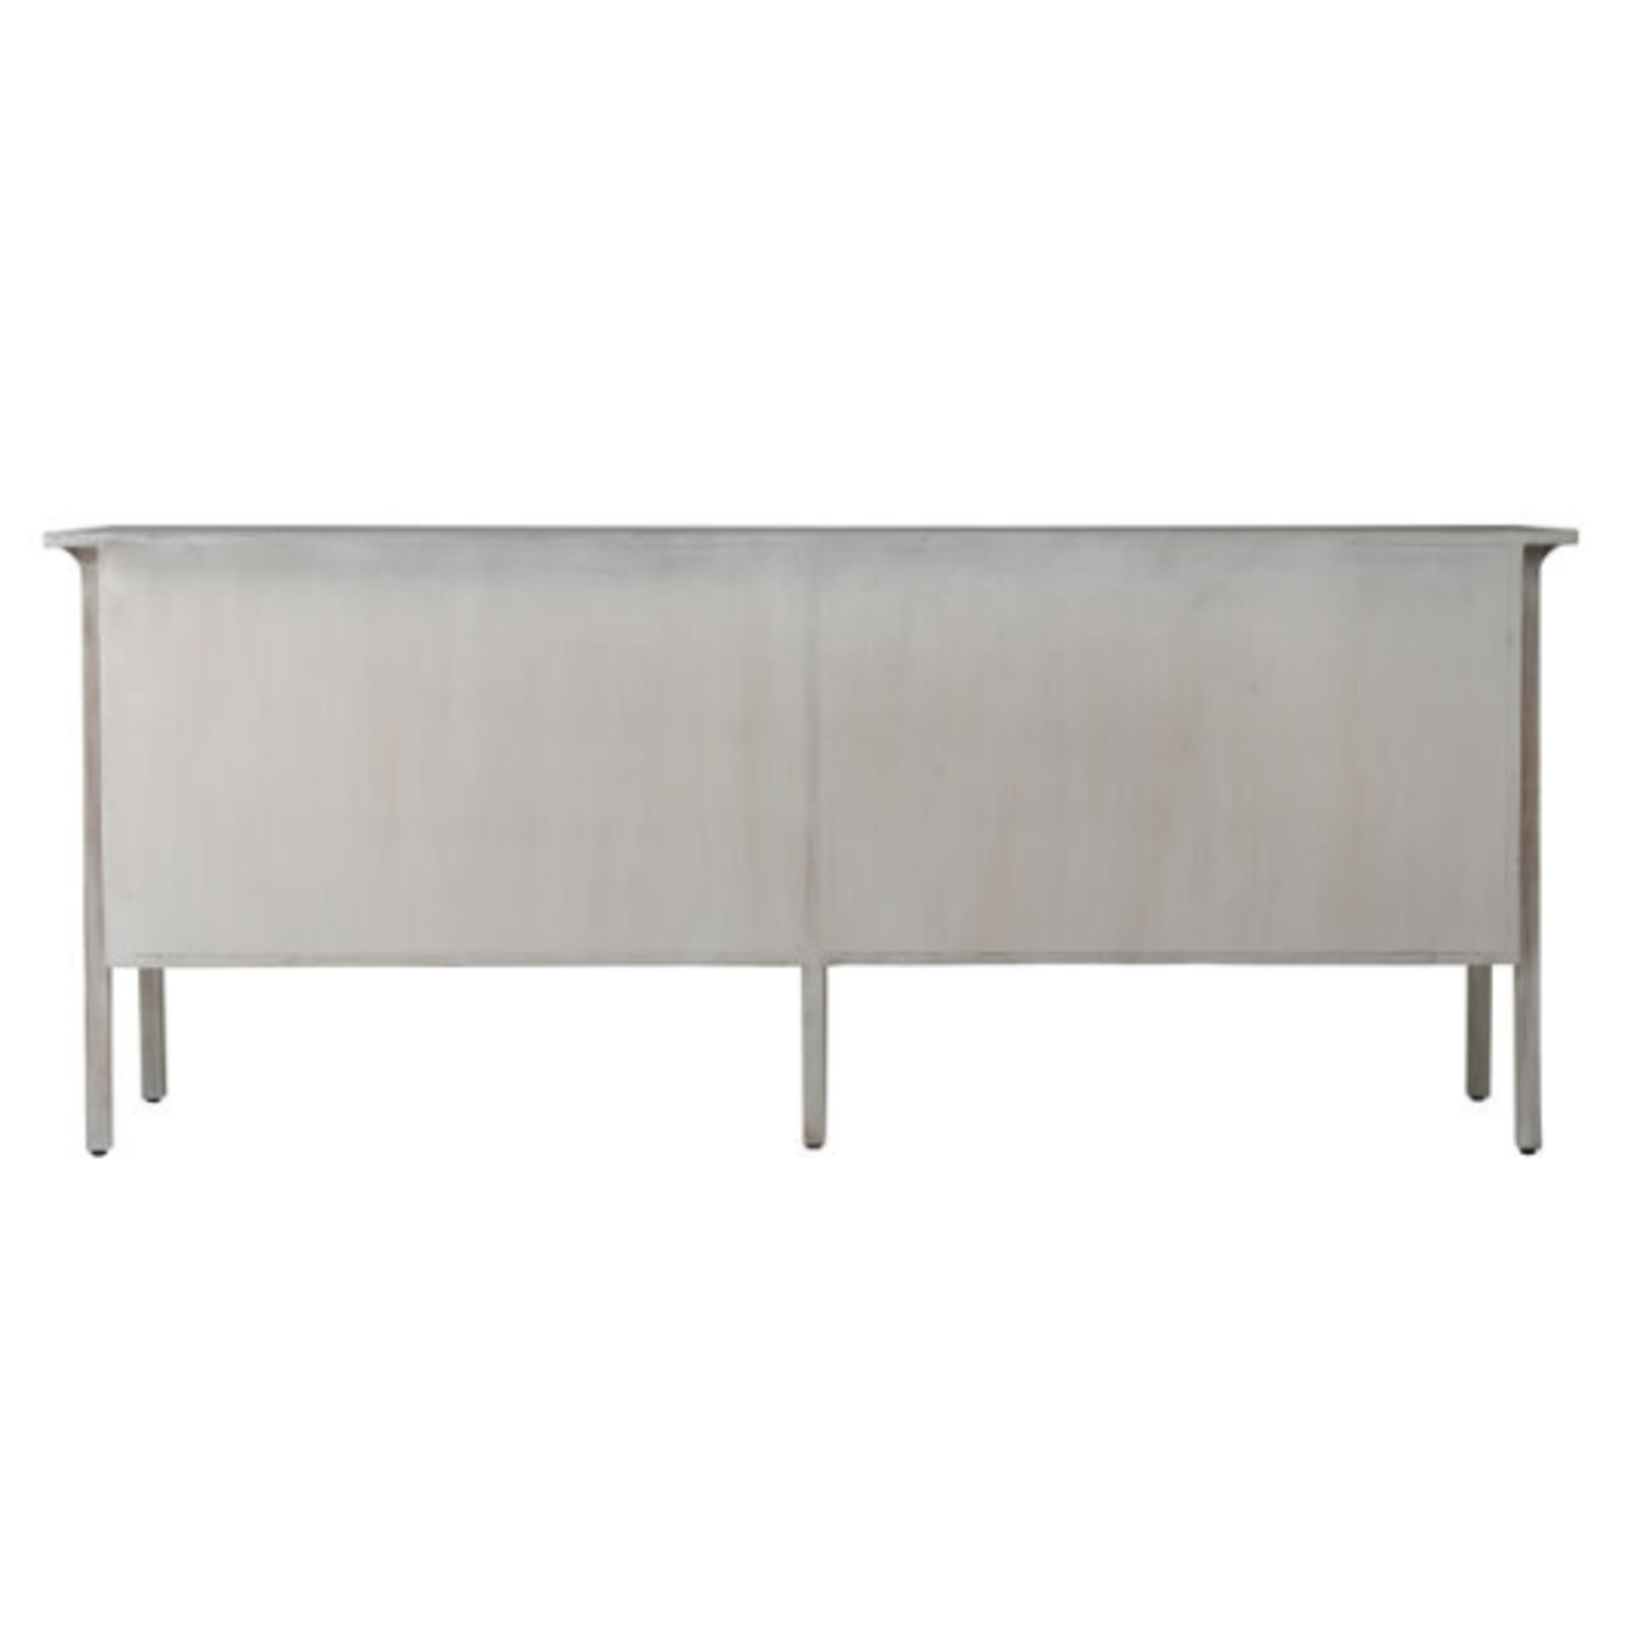 Outside The Box 79x22x32 Torre Light Gray Wash Reclaimed Pine 4 Door Sideboard